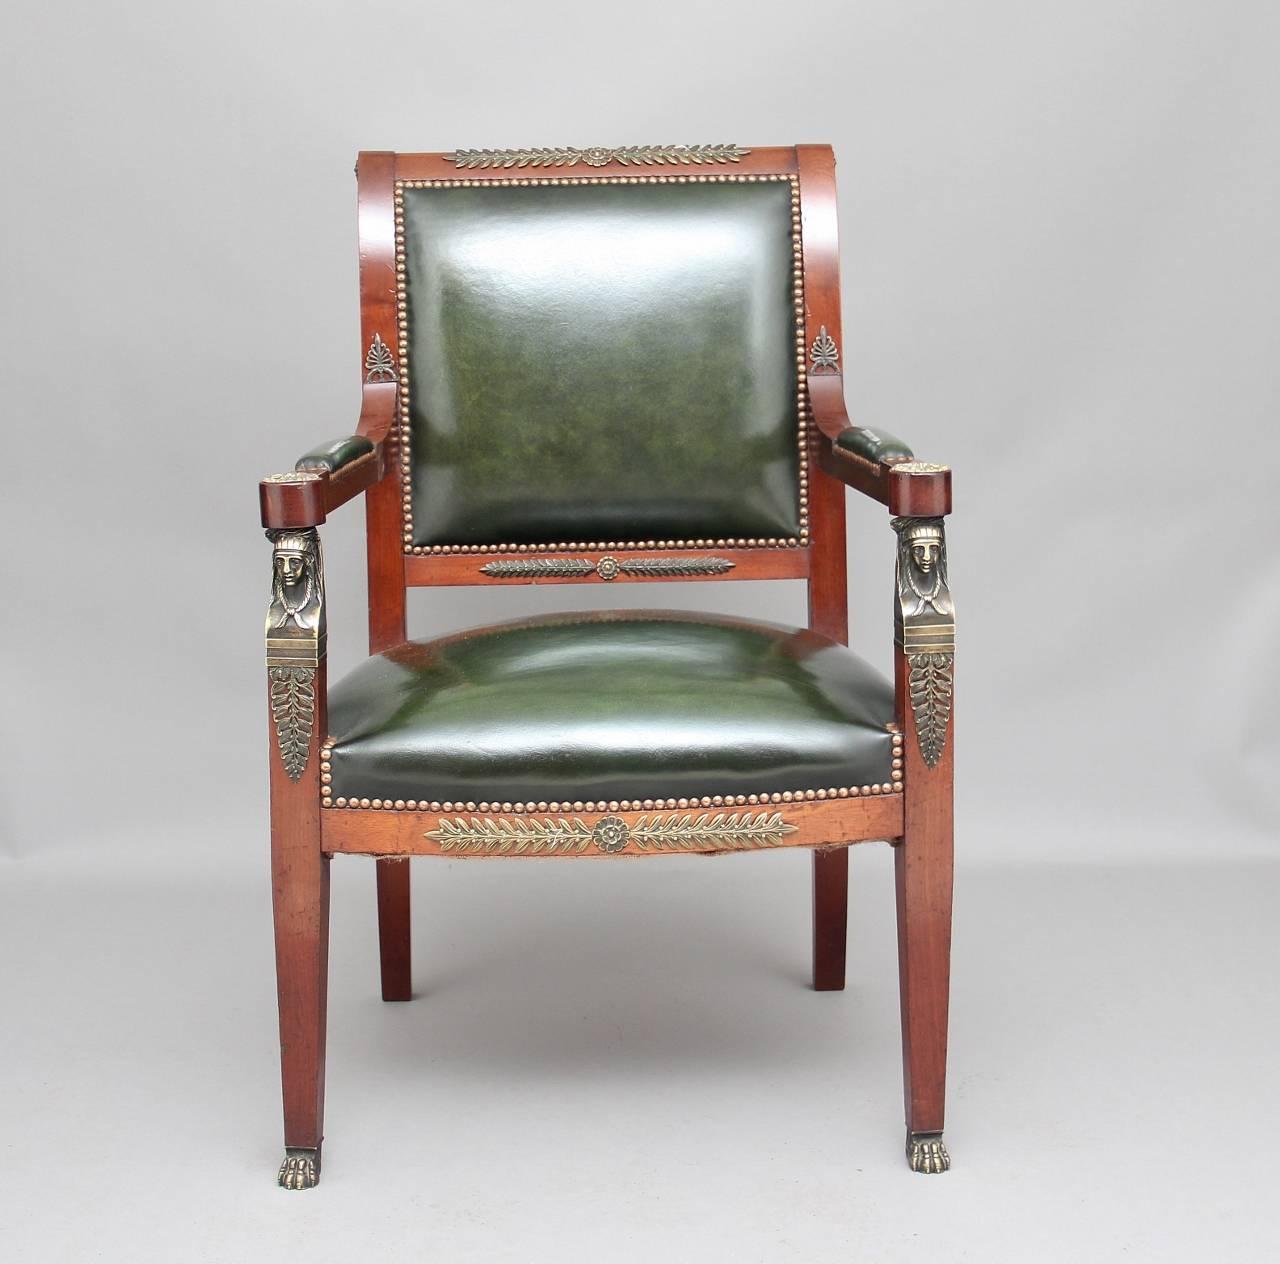 19th century French mahogany and ormolu open armchair upholstered in a dark green leather with brass stud decoration, the shaped and scroll back having patraes on either side, the leather padded arms terminating with larger patraes, the arms